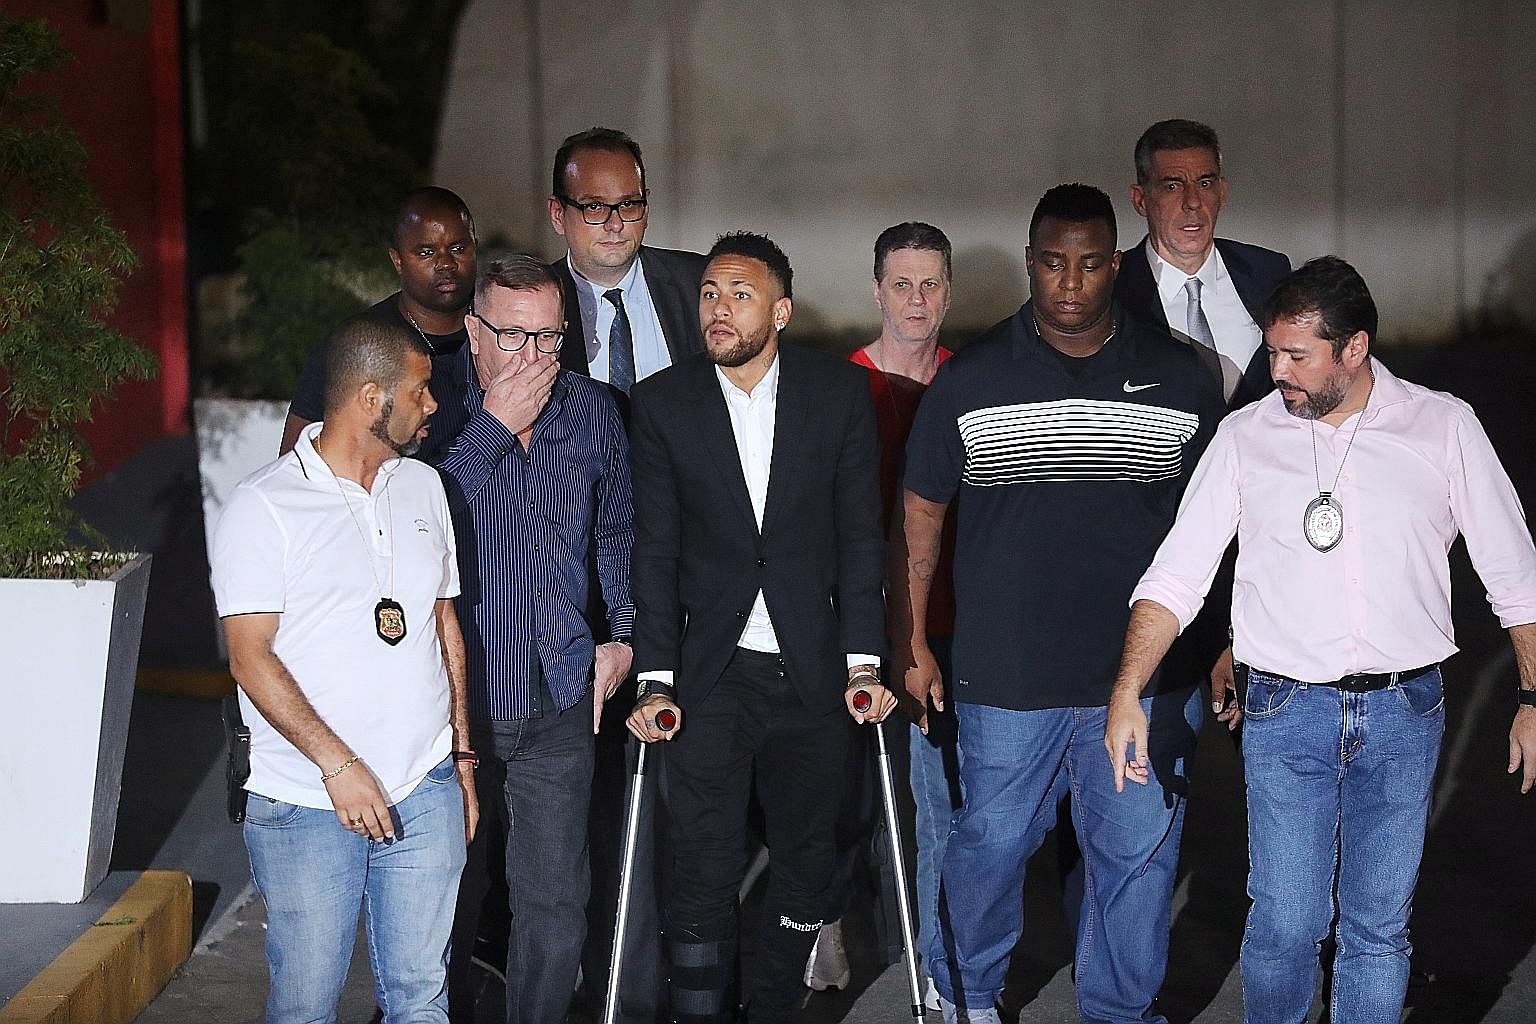 Neymar, on crutches, leaving a police station in Sao Paulo last Thursday after he was questioned for five hours concerning a rape allegation. The Brazilian has missed chunks of the past two seasons with injuries.